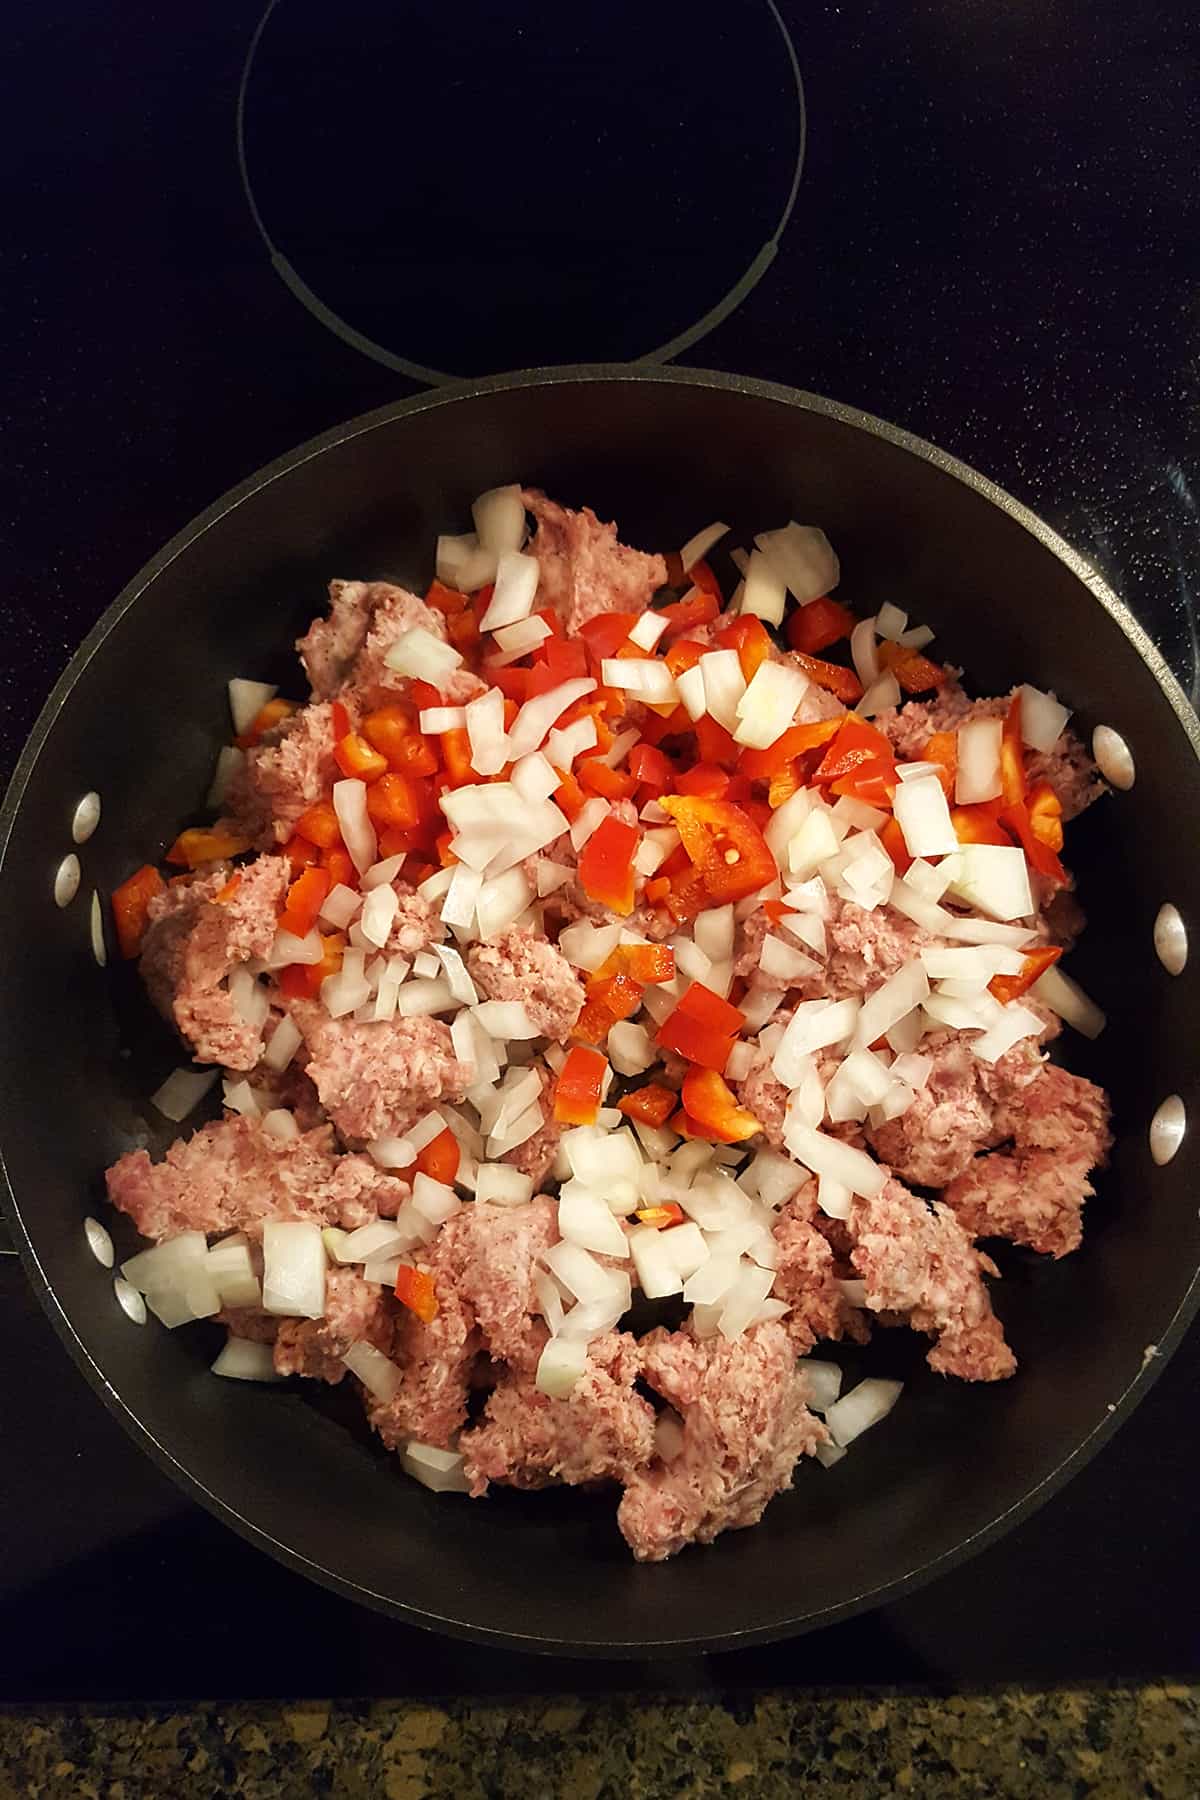 Onions, peppers, and sausage in a skillet.